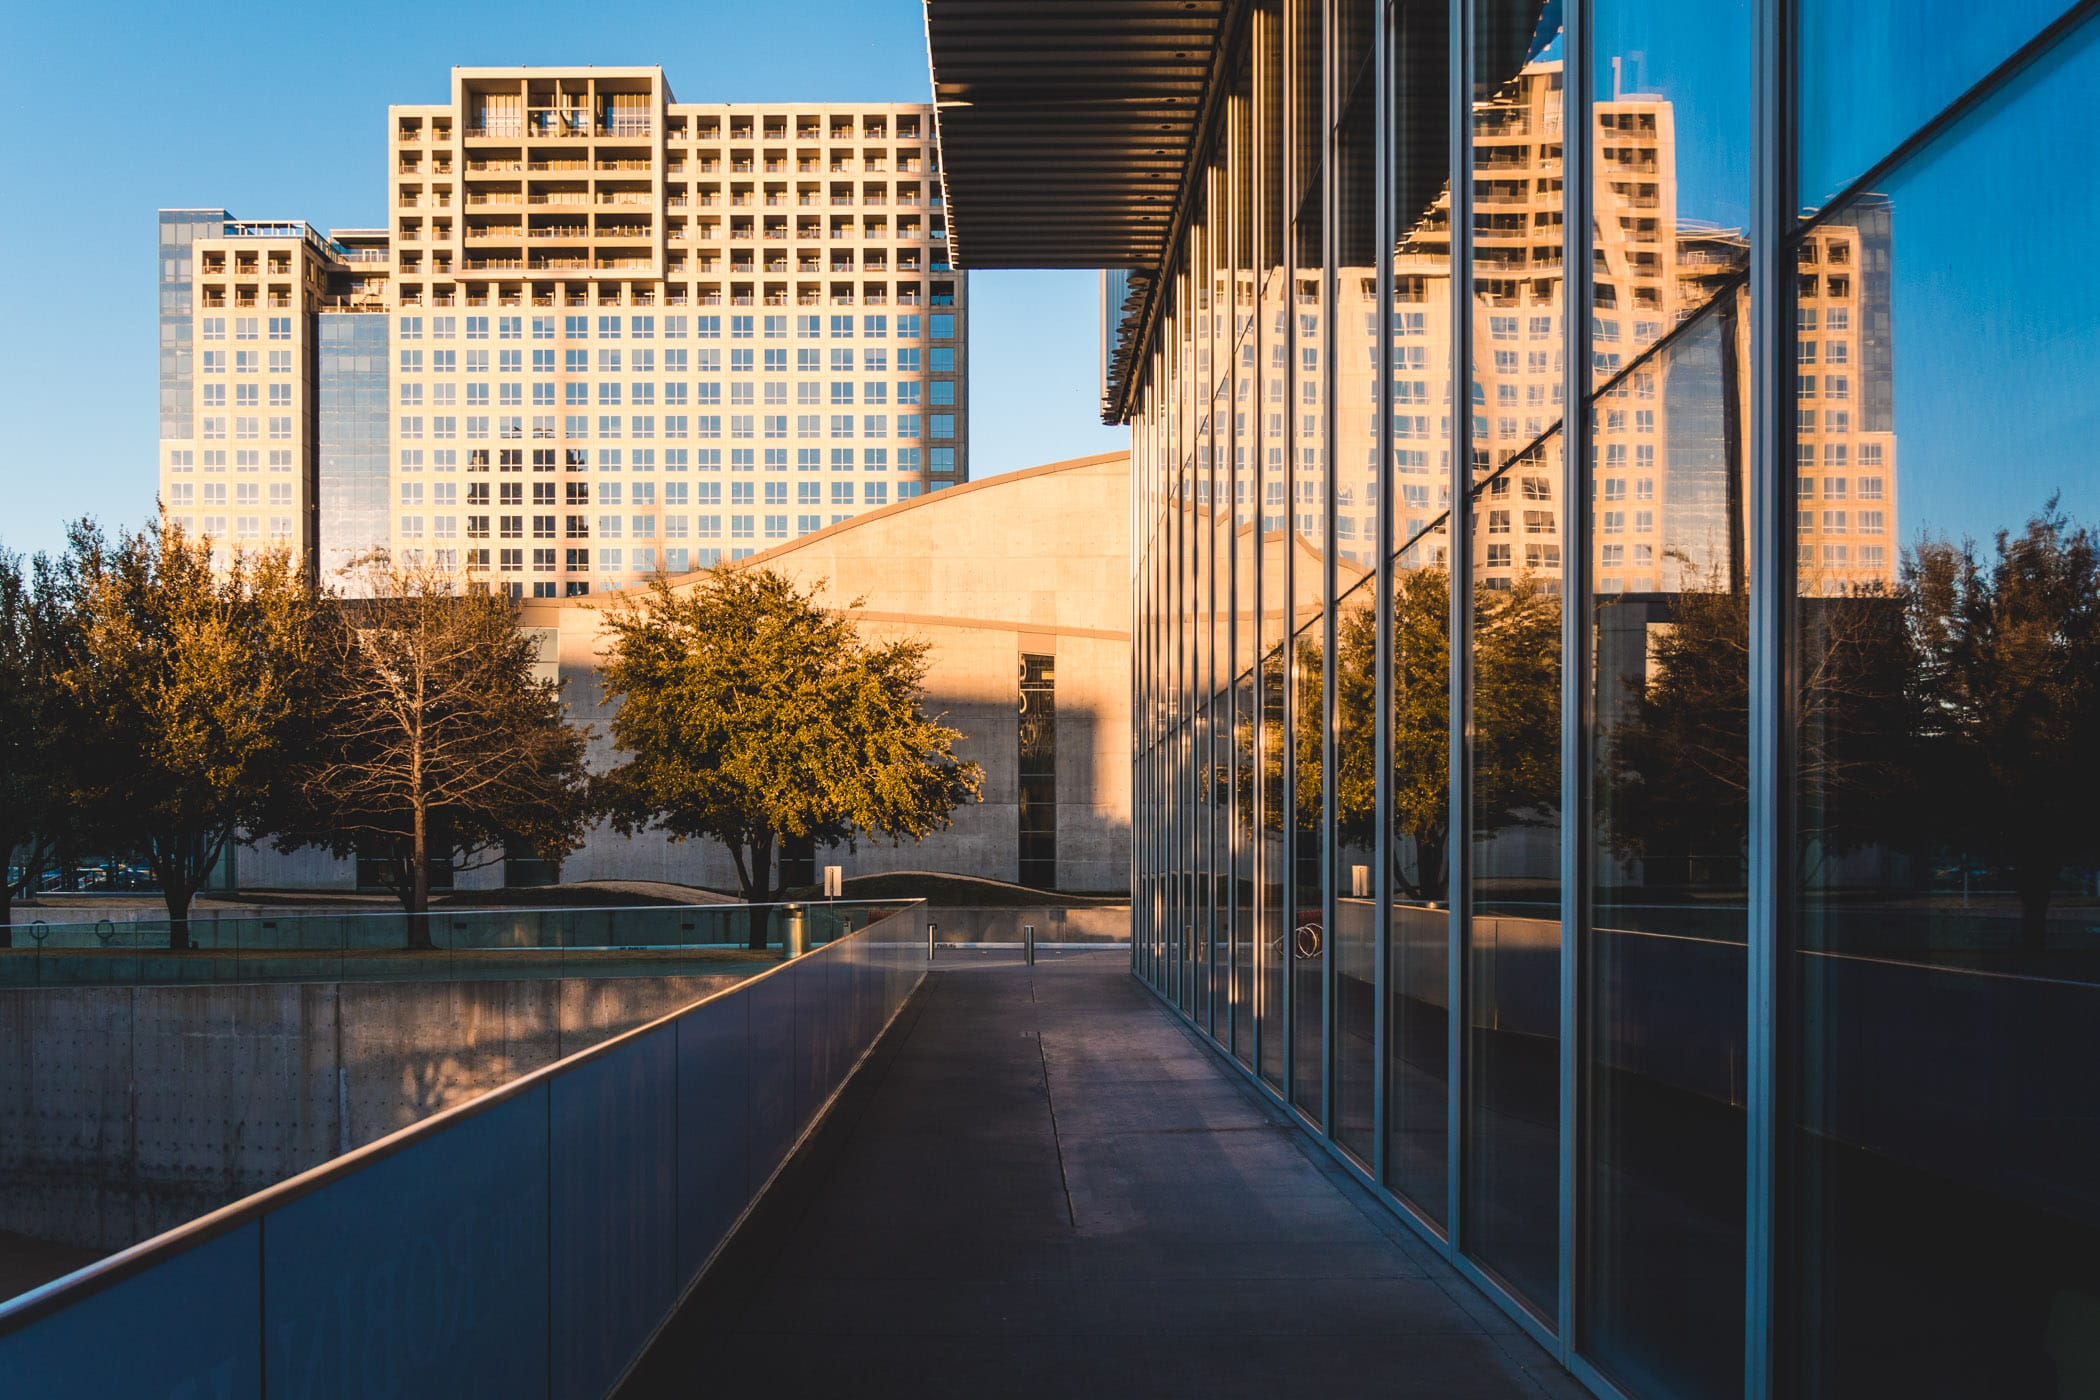 The Dallas Arts District's One Arts Plaza is reflected in the glass facade of the adjacent Wyly Theatre.